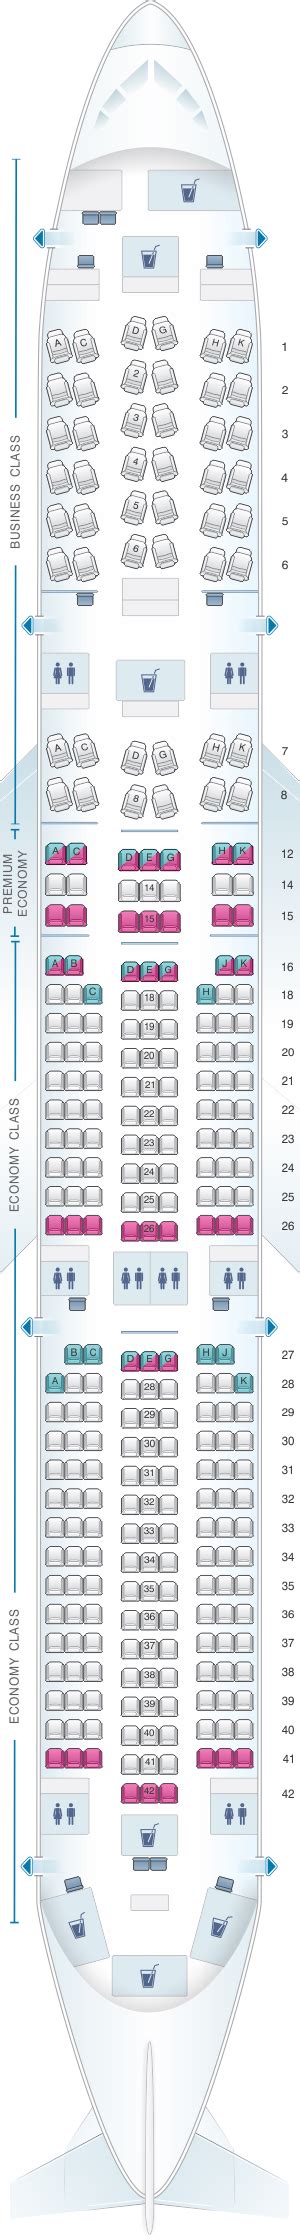 Airbus A Seating Chart